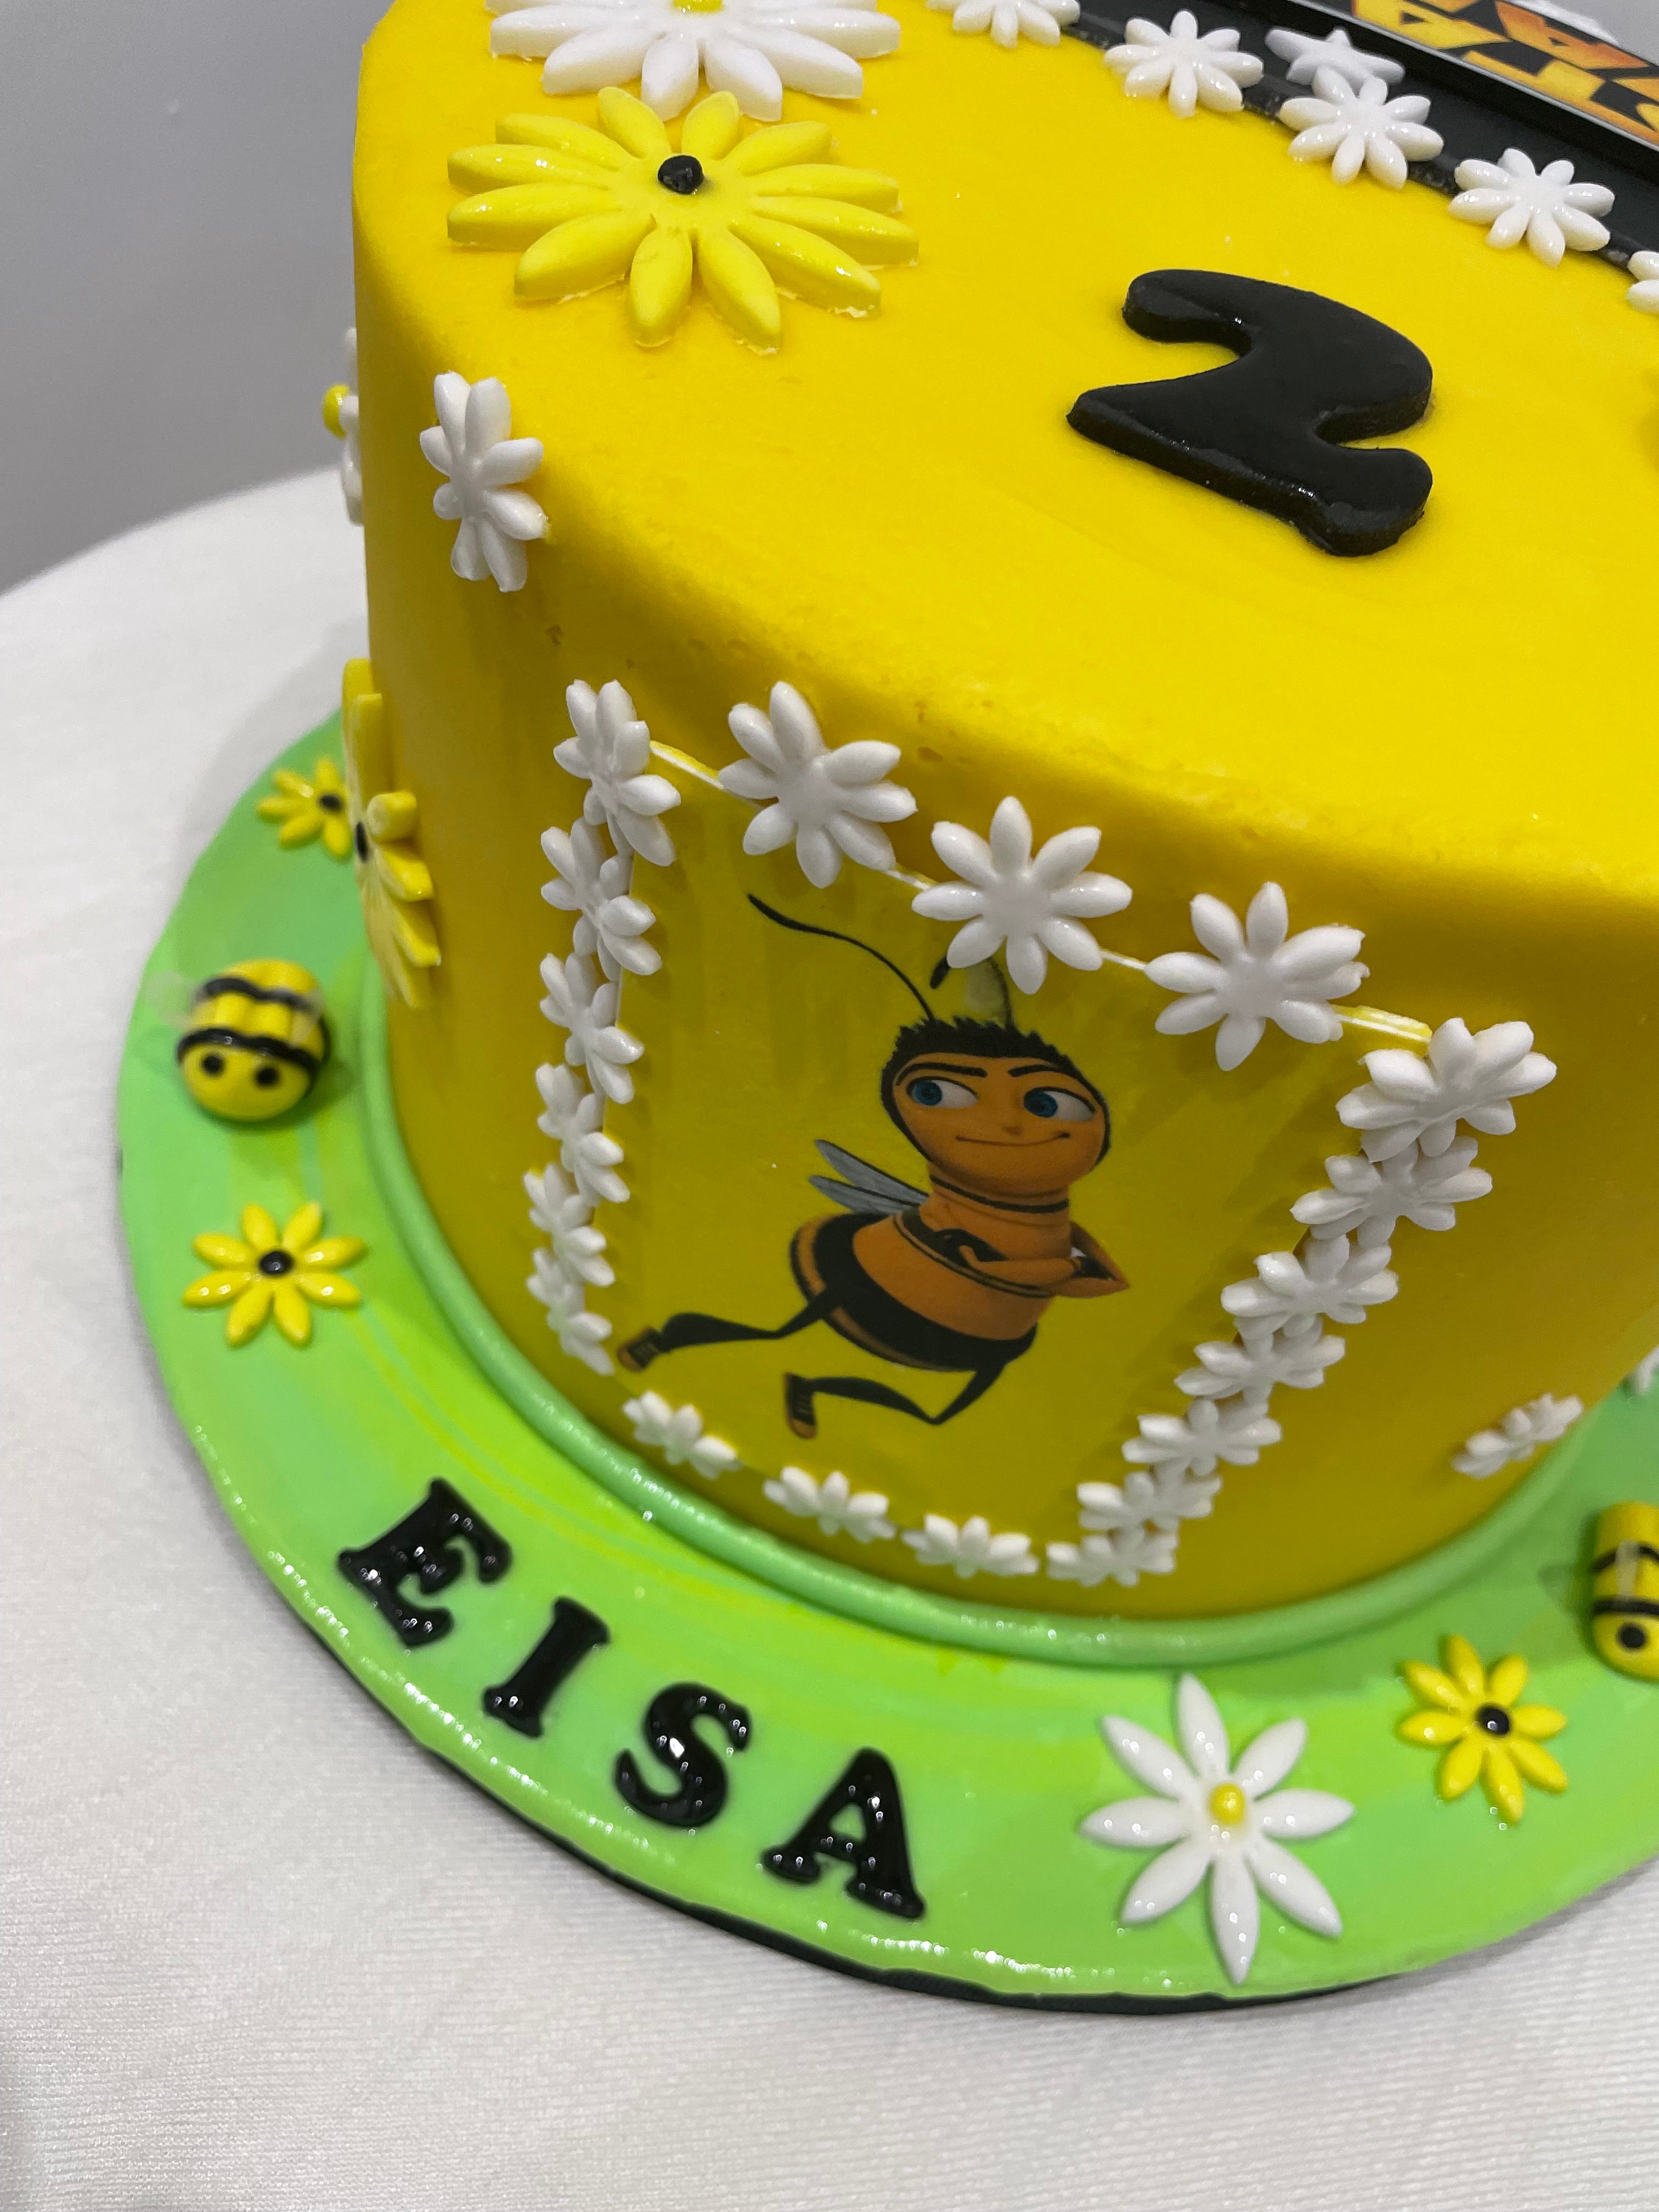 2 IN 1 CAKE - BEE & SPACE CAKE